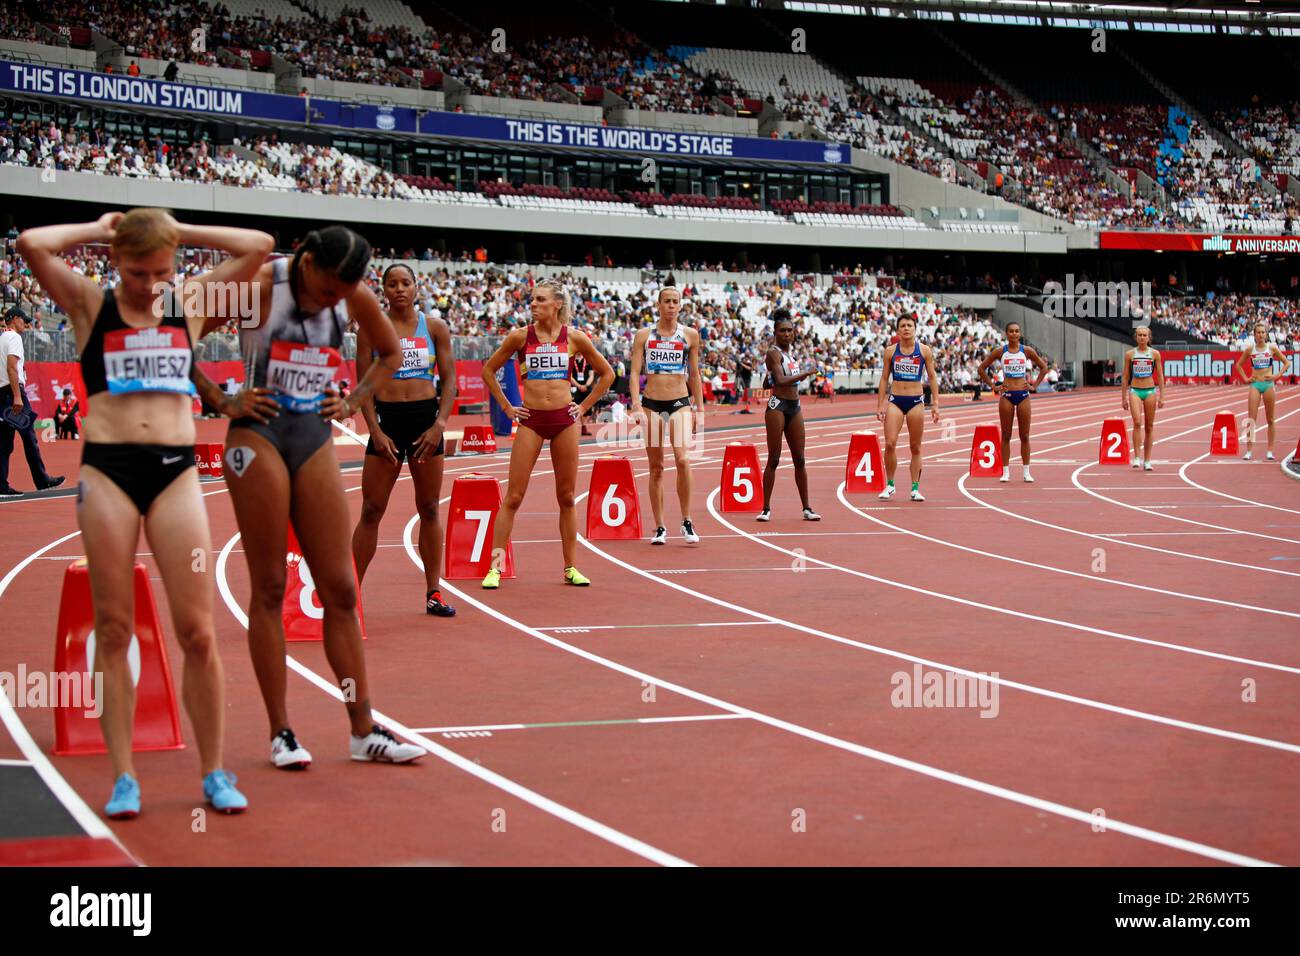 The Start of the Women's 800m Final at the 2019, IAAF Diamond League, Anniversary Games, Queen Elizabeth Olympic Park, Stratford, London, Großbritannien. Stockfoto